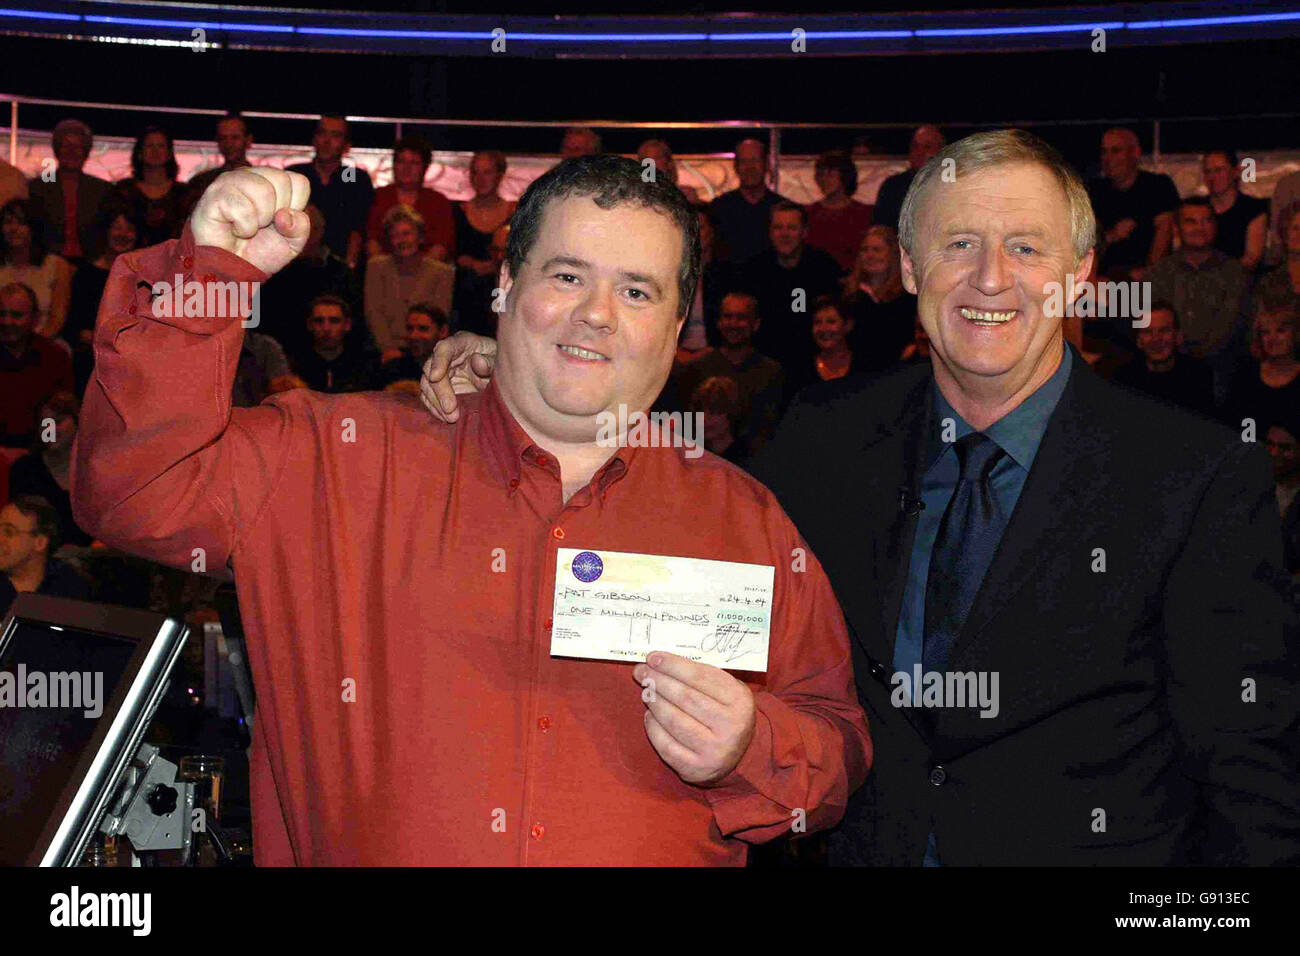 FILE PICTURE dated 24 April 2004 showing computer programmer Pat Gibson being congratulated by host Chris Tarrant after becoming the fourth and youngest 1 million winner on the quiz show Who Wants To Be A Millionaire? The quiz expert was celebrating today after also winning Mastermind. Pat Gibson won the coveted crystal bowl last night without passing on a single question. London, Wednesday 9 November 2005. See PA story SHOWBIZ Mastermind. PRESS ASSOCIATION Photo. Photo credit should read: PA/CELADOR/ITV Stock Photo